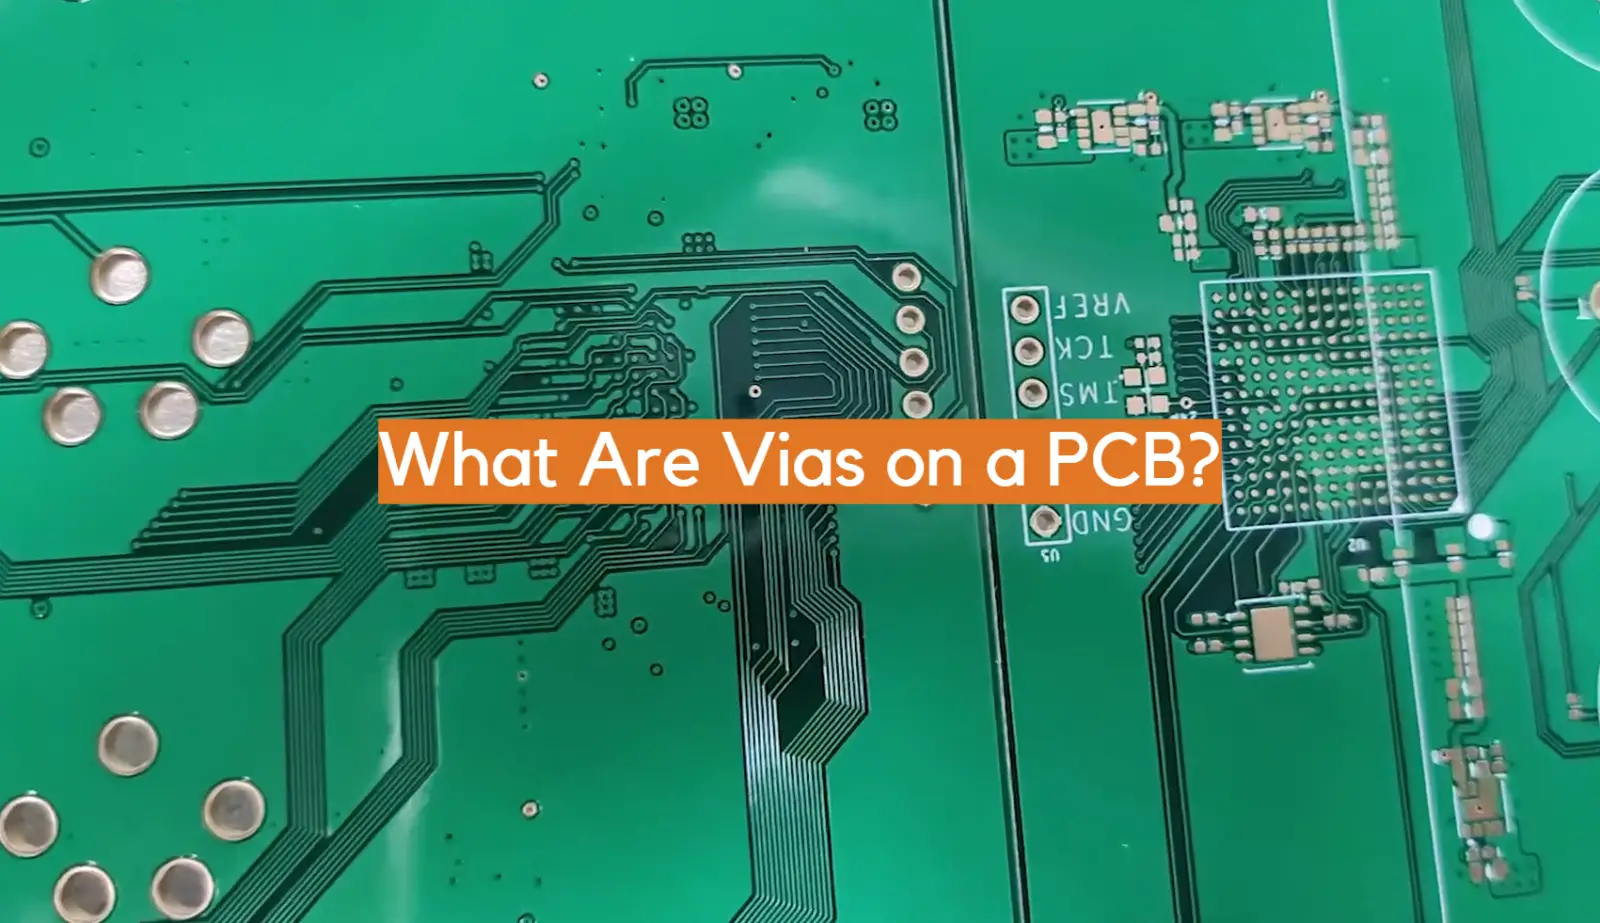 What Are Vias on a PCB?